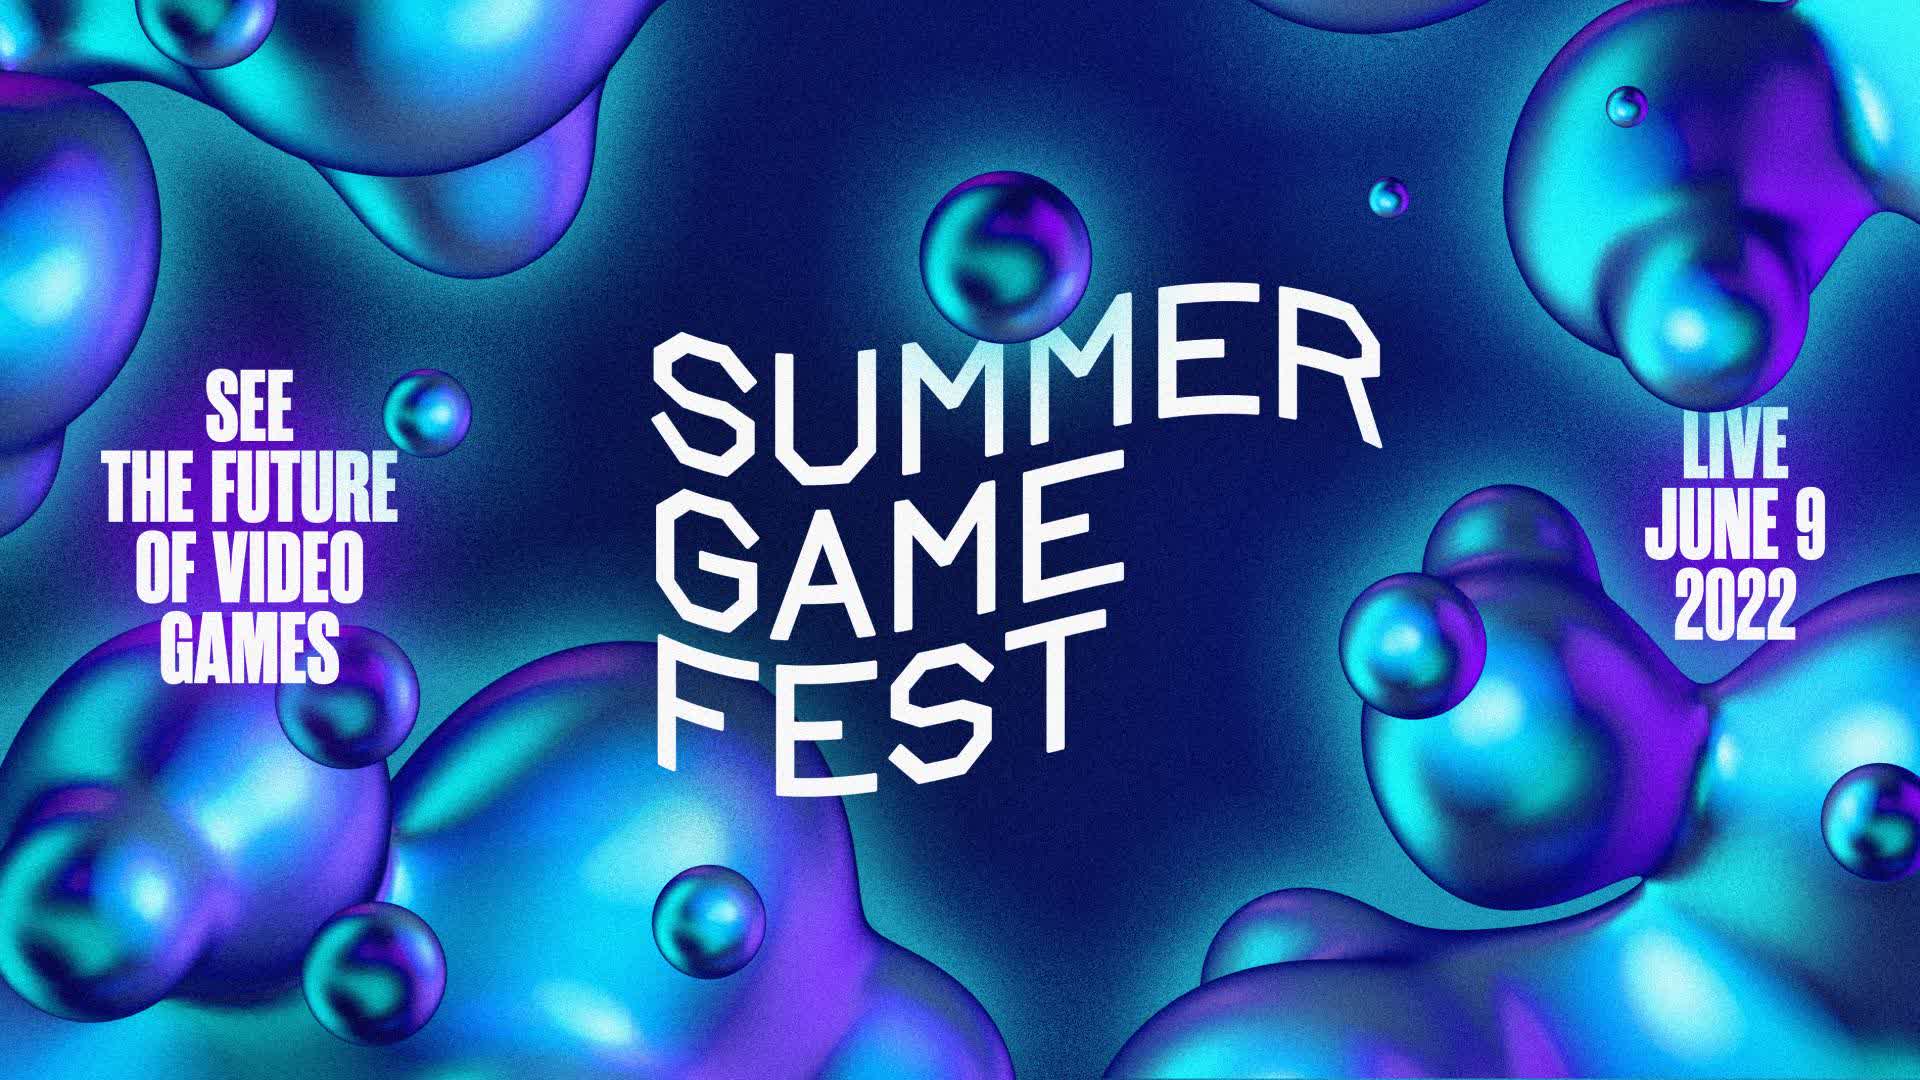 Summer Game Fest returns on June 9, and you can watch it in Imax